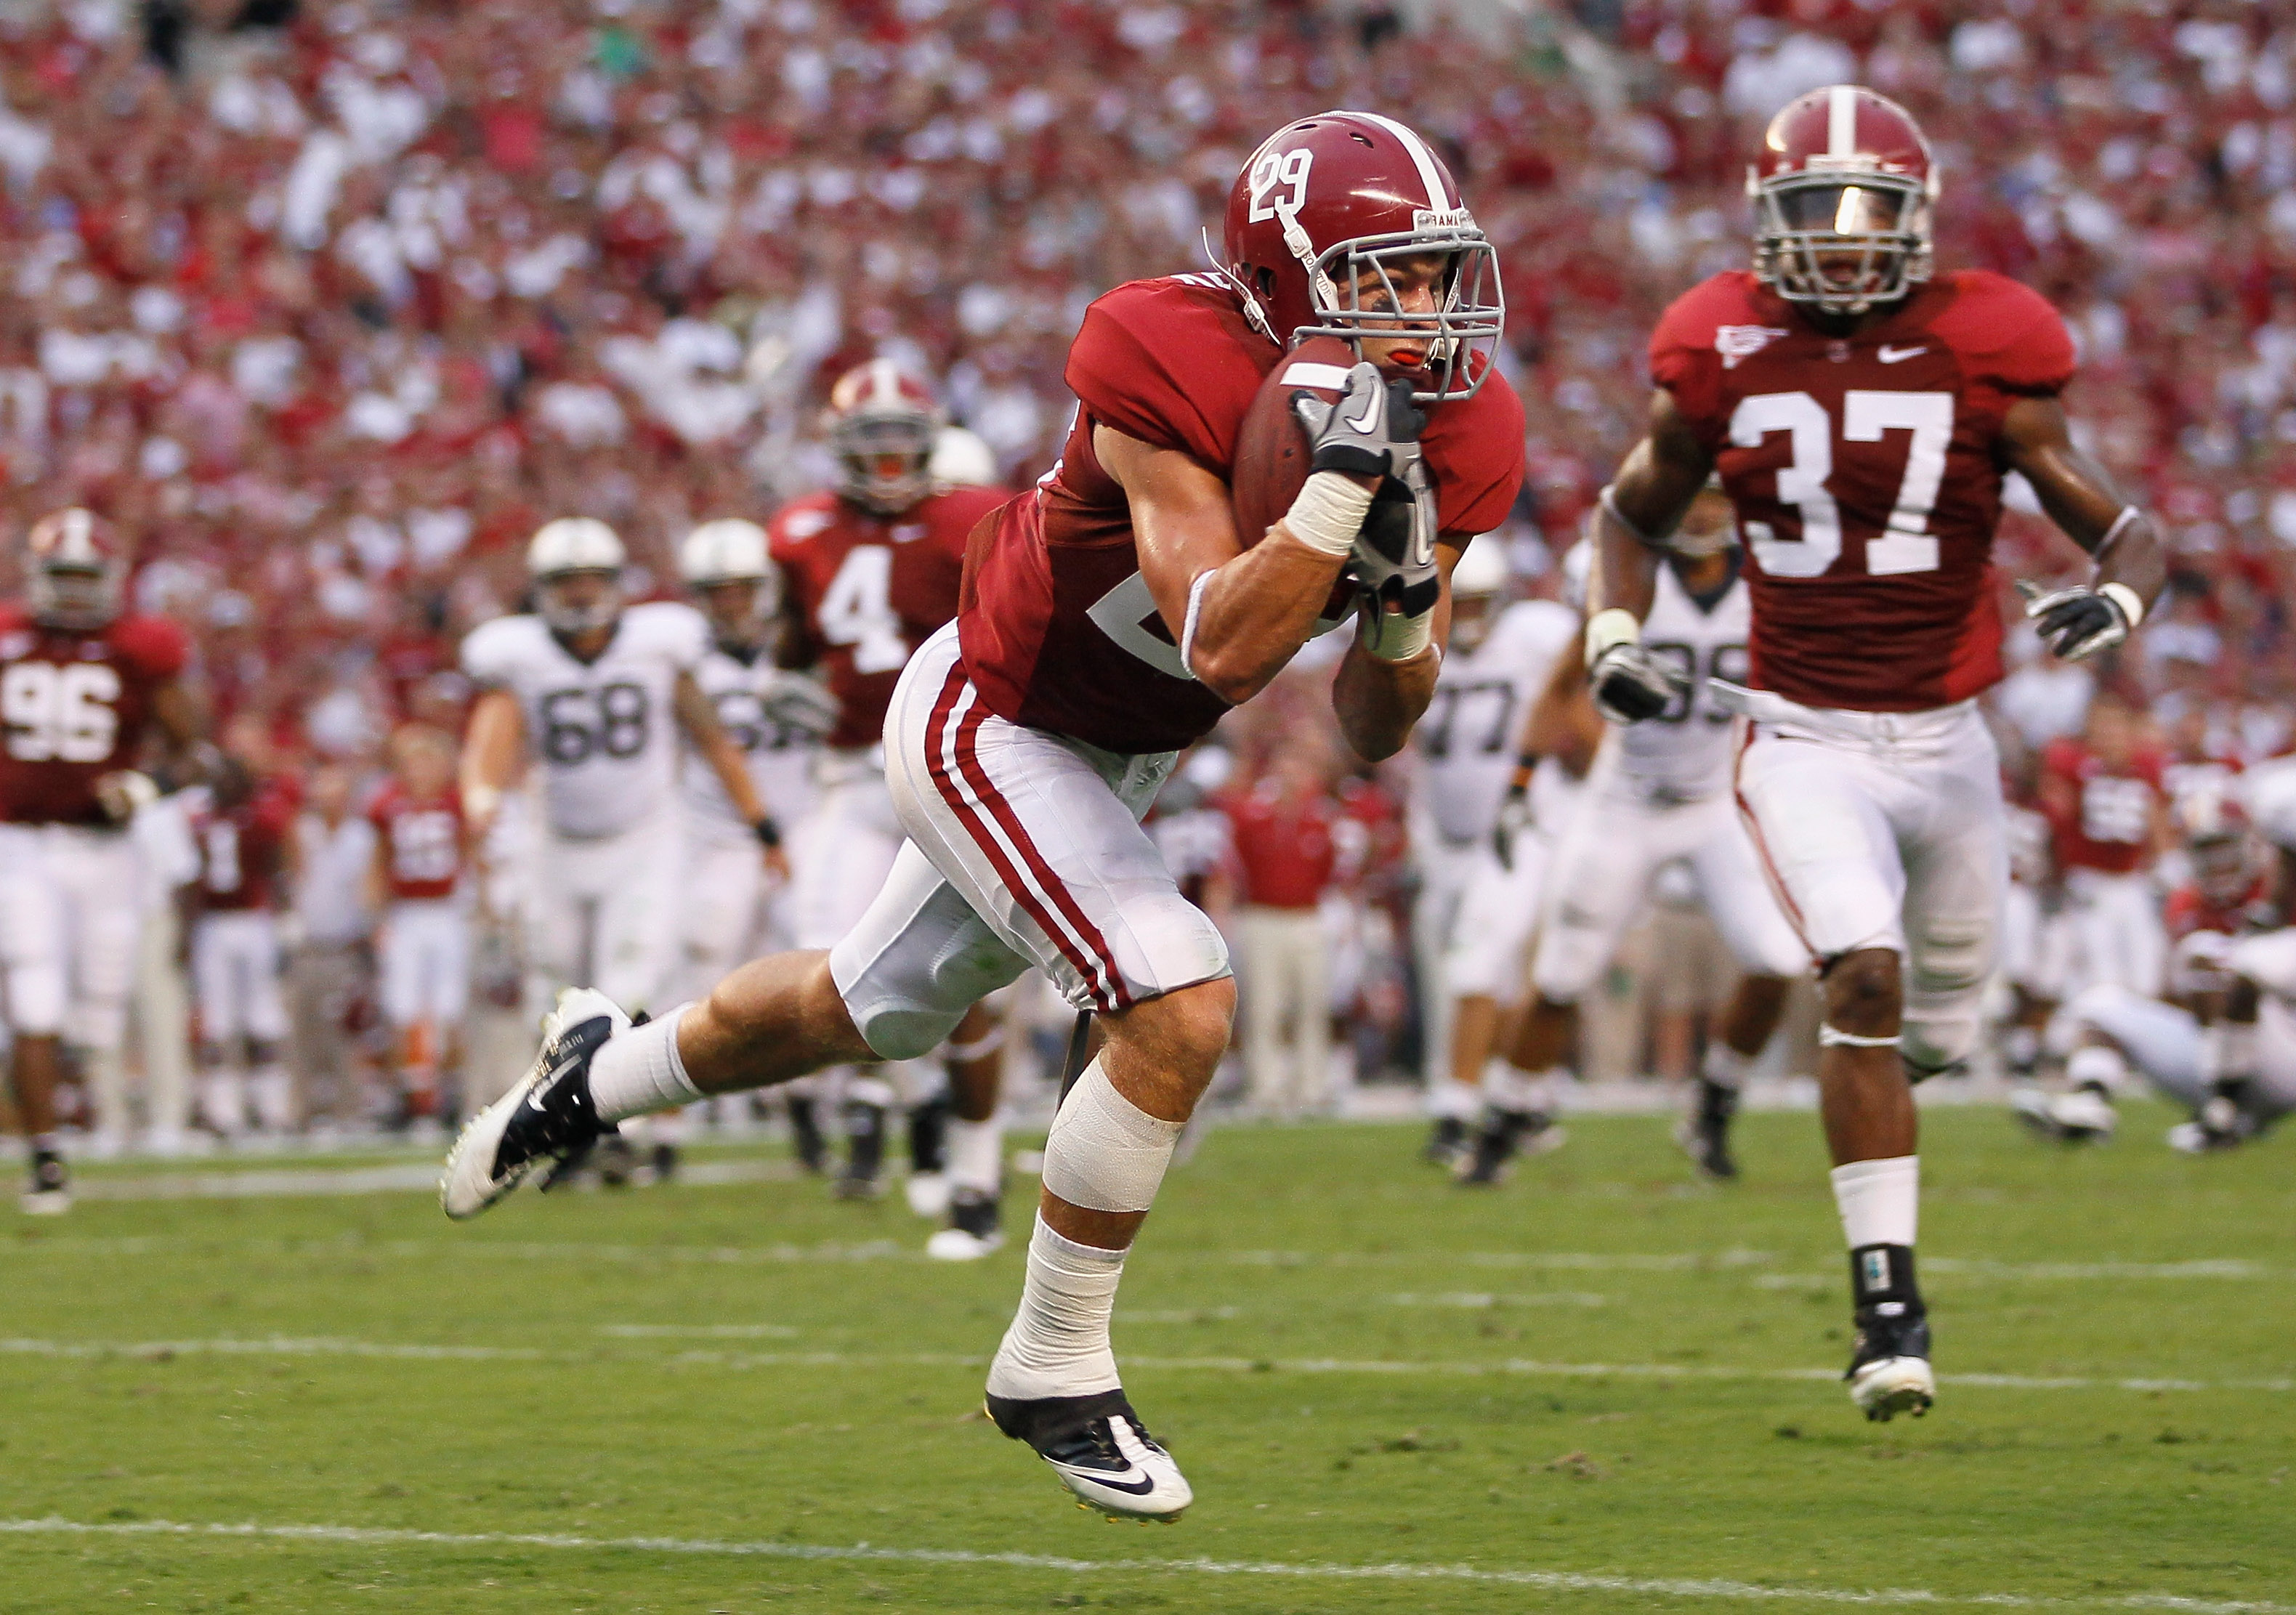 TUSCALOOSA, AL - SEPTEMBER 11:  Will Lowery #29 of the Alabama Crimson Tide intercepts a pass by the Penn State Nittany Lions at Bryant-Denny Stadium on September 11, 2010 in Tuscaloosa, Alabama.  (Photo by Kevin C. Cox/Getty Images)